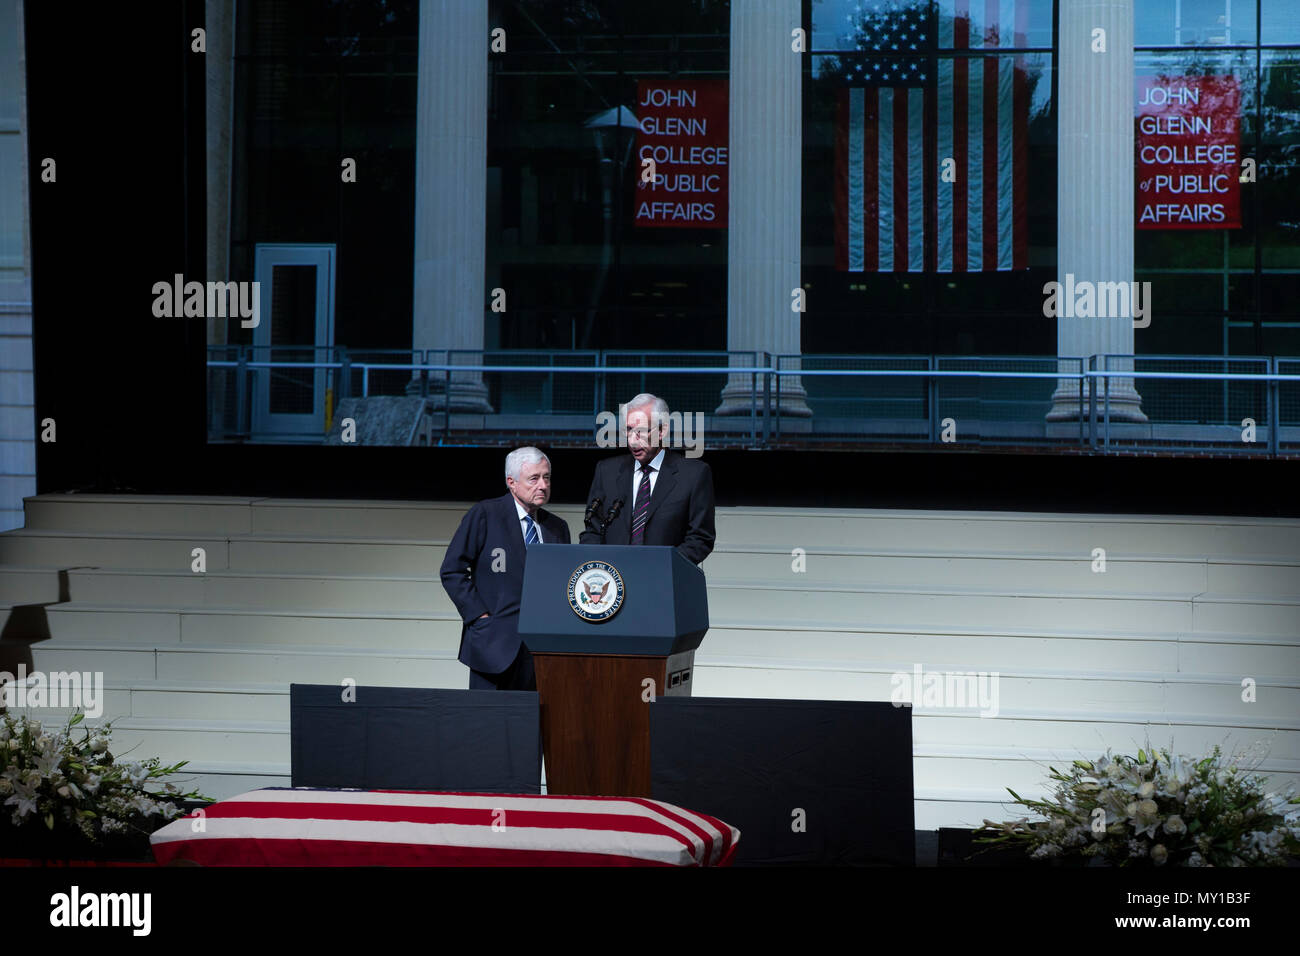 Jack Kessler and Louis Beck read the opening prayer during the Celebration of Life for Sen. John H. Glenn, Jr., at the Ohio State University, Columbus, Ohio, Dec. 17, 2016. Having flown 149 combat missions in World War II and the Korean War, Glenn became the first man to orbit the earth in 1962. After retiring from the space program, Glenn was elected to the U.S. Senate in 1974 to represent the state of Ohio. (U.S. Marine Corps photo by Lance Cpl. Daisha R. Sosa) Stock Photo